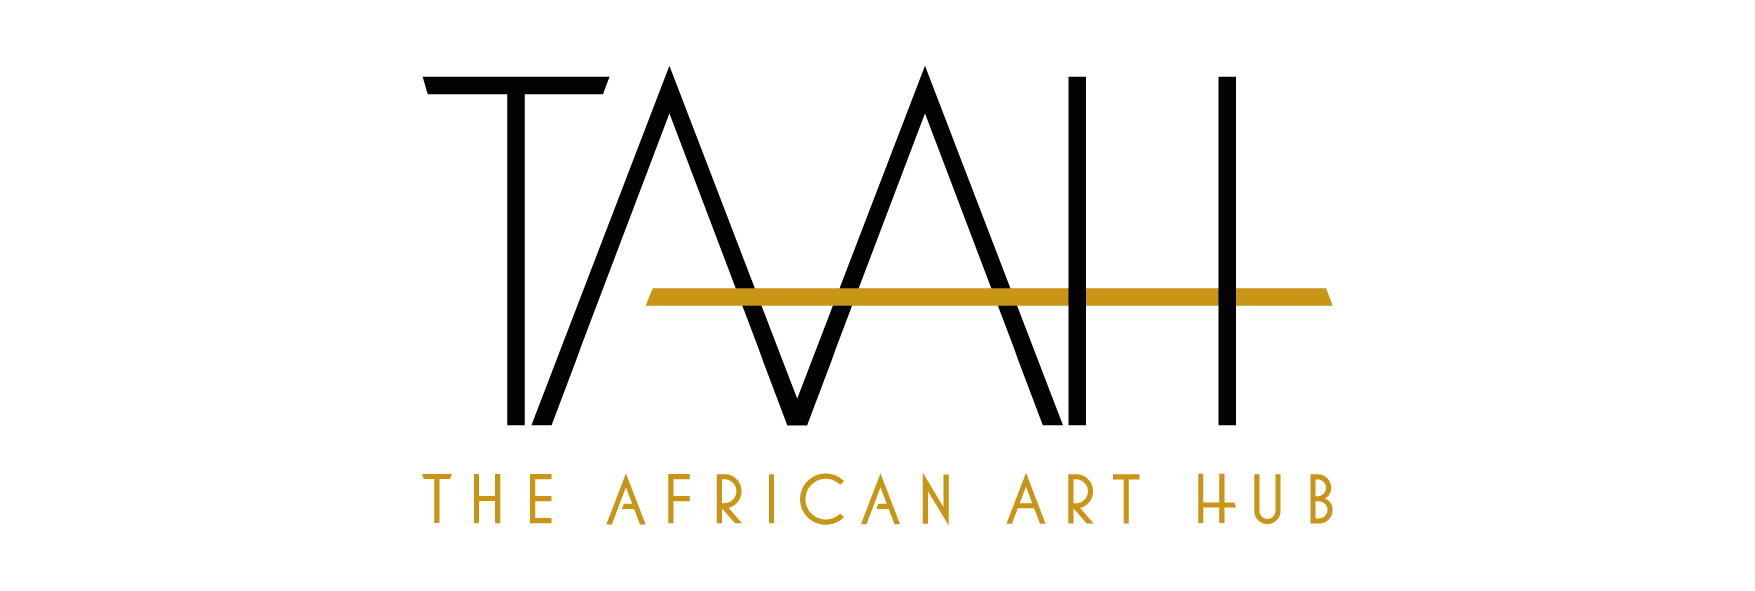 London: The African Art Hub - A Community for African Arts and Collectors